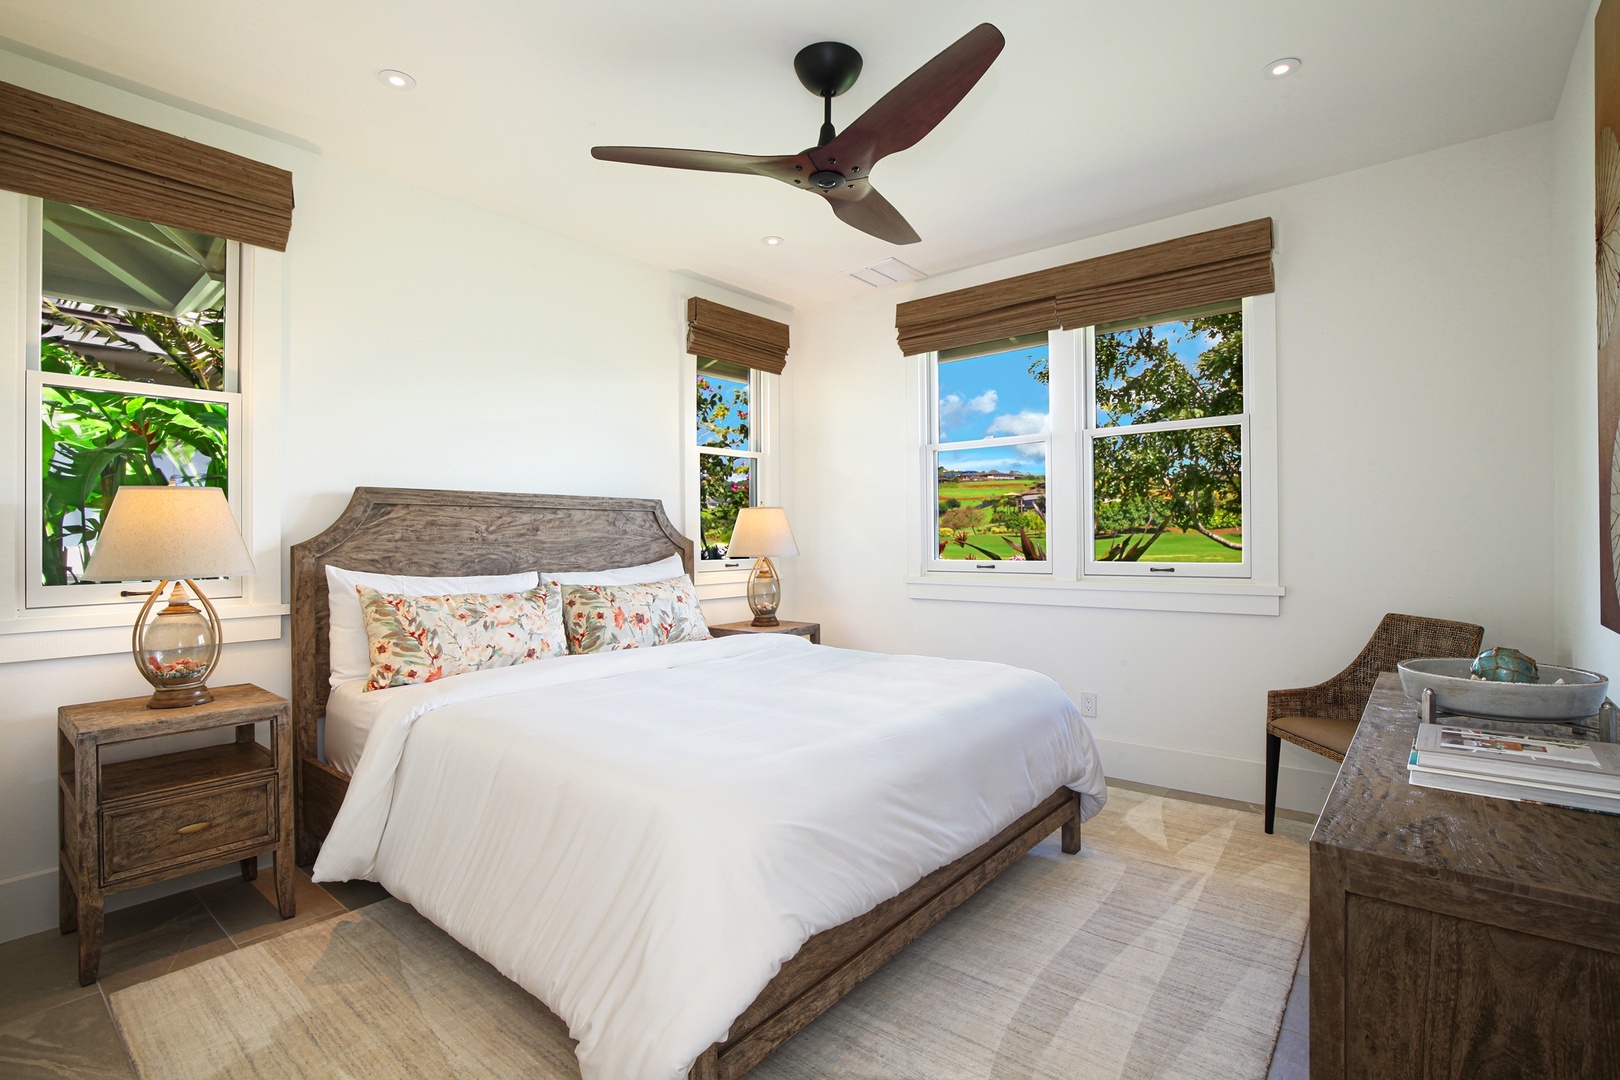 Koloa Vacation Rentals, OFB Hale Mala Ulu - Guest bedroom 2 with king bed and garden views